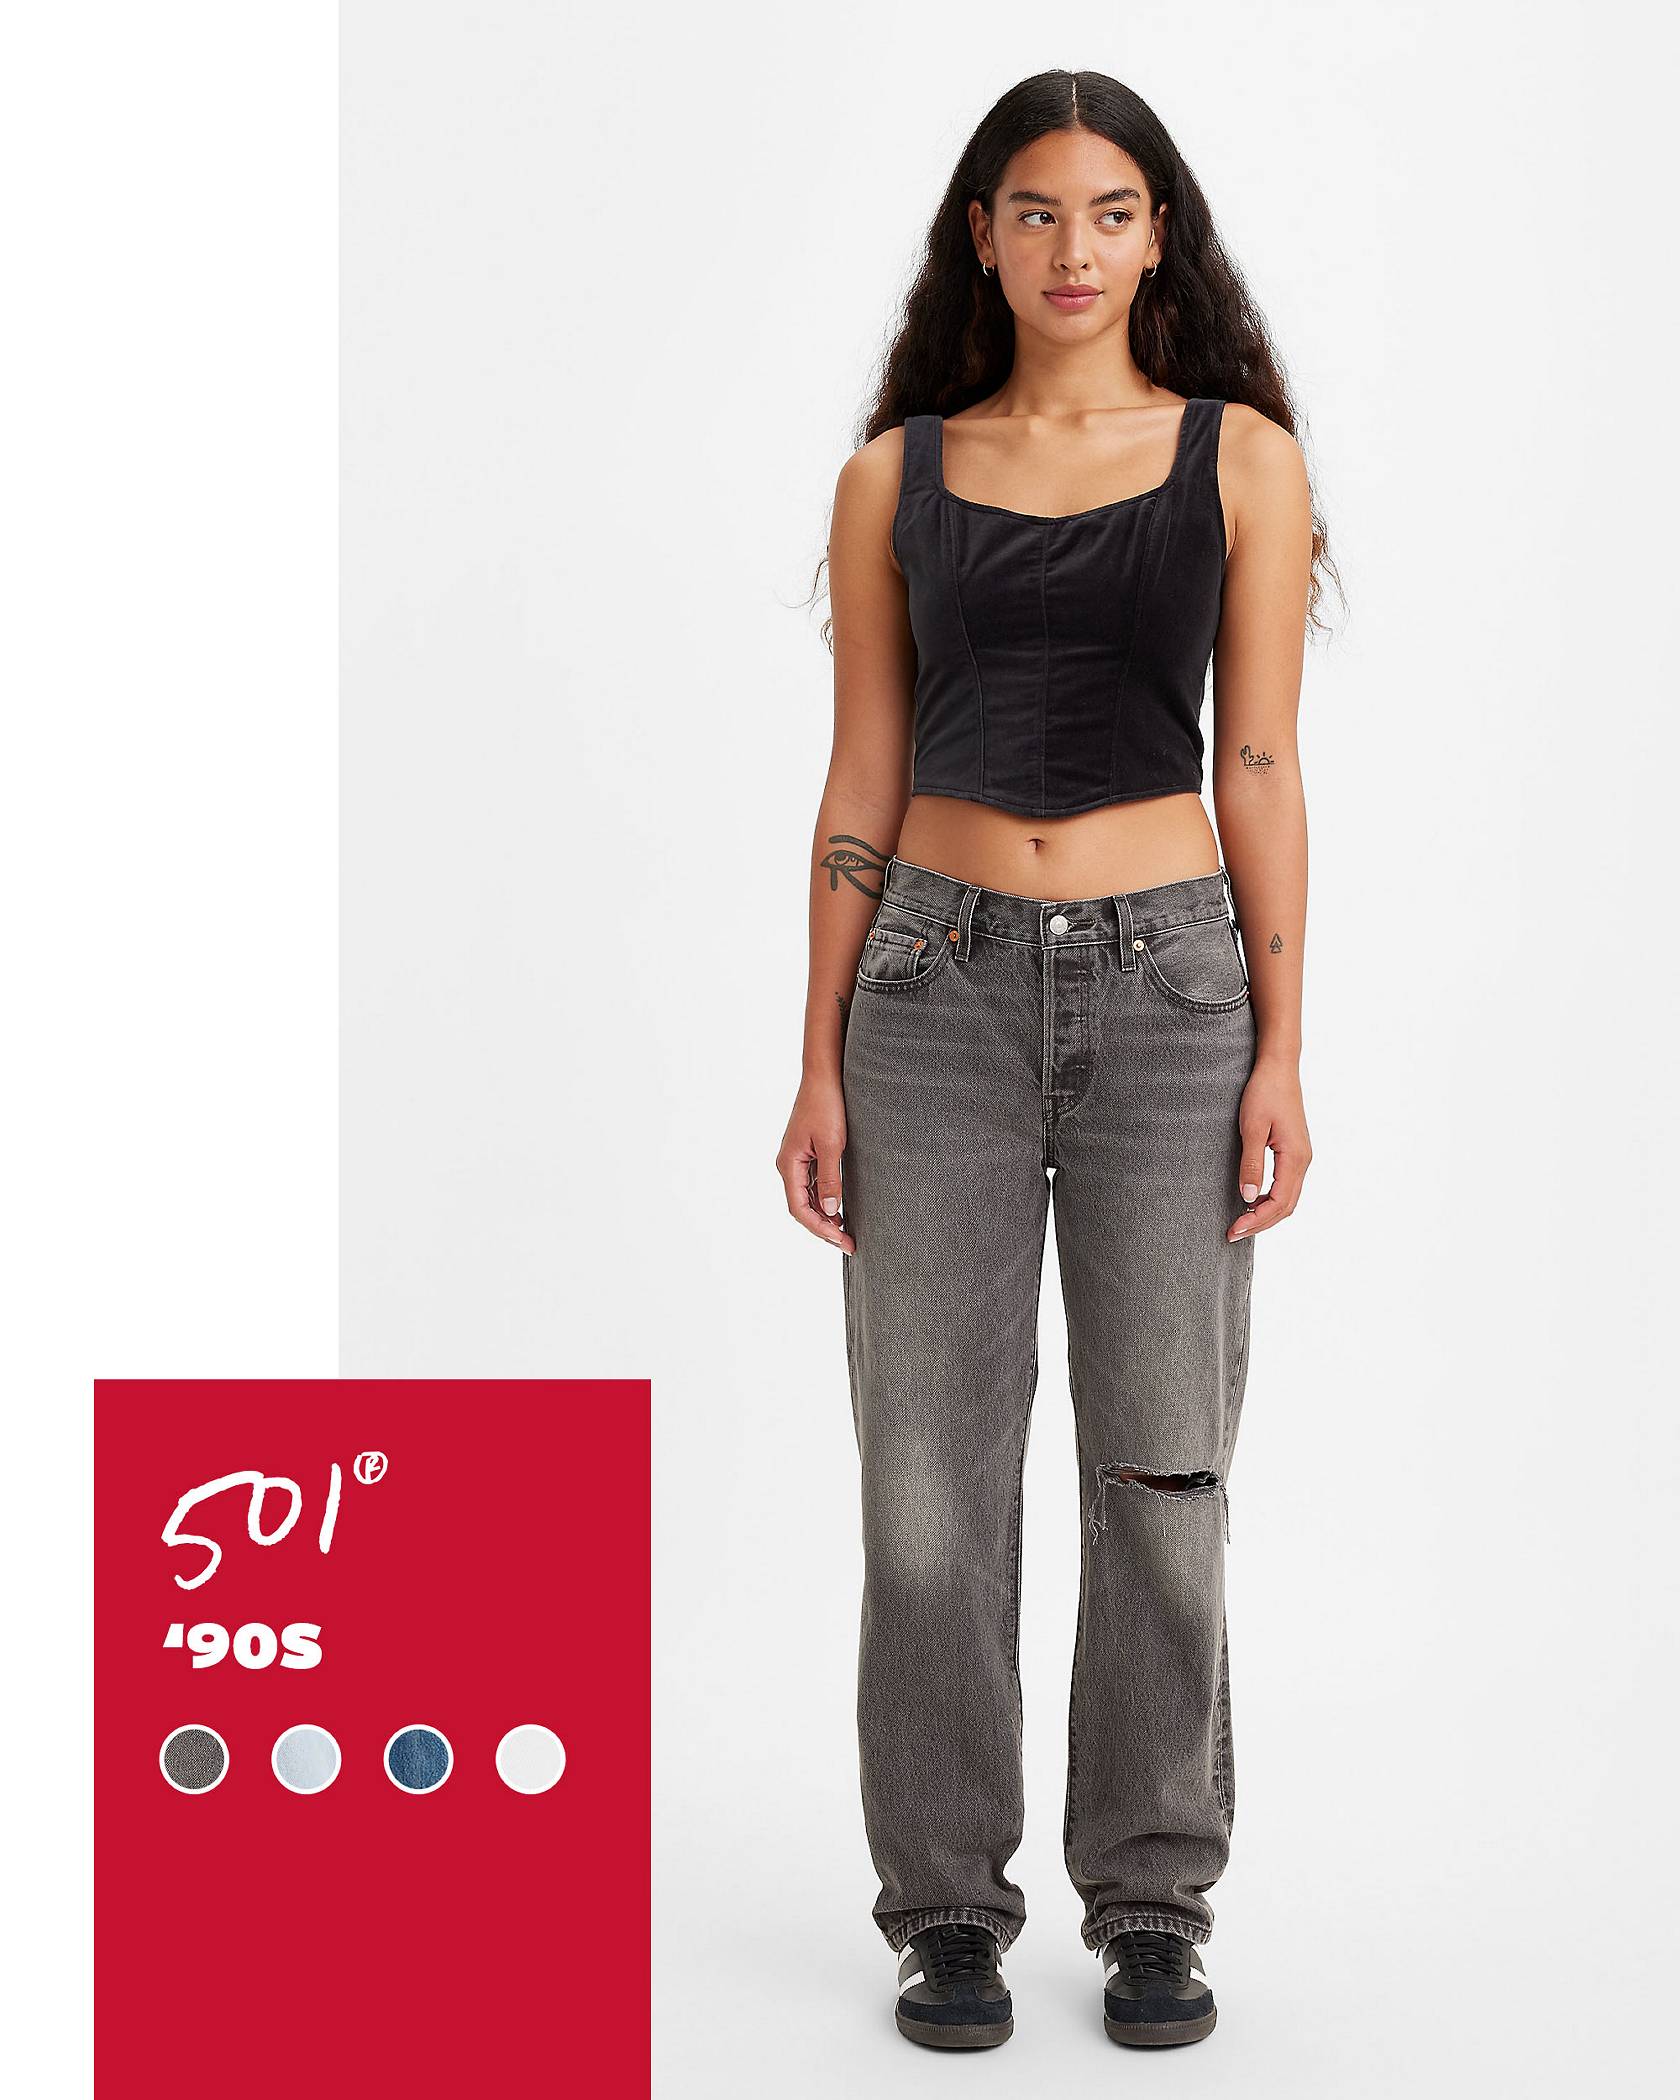 Paneled shot of model in black distressed wash 501® '90s jeans with a red tag displaying product name and sample color swatches